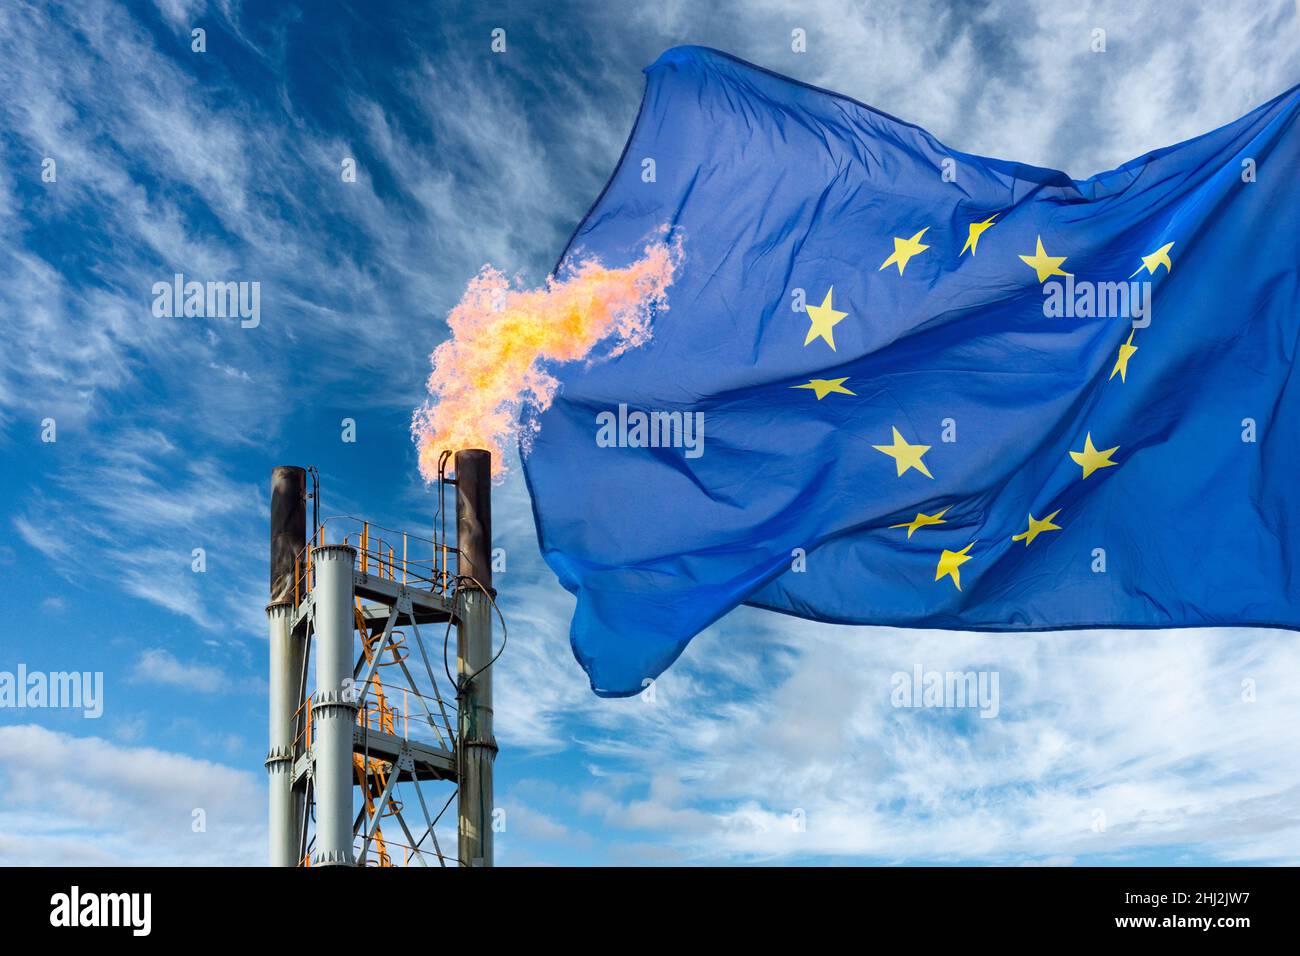 Industrial gas flare chimney with EU flag. Europe, European gas supply, gas prices, Russia Ukraine conflict, fossil fuels... concept Stock Photo